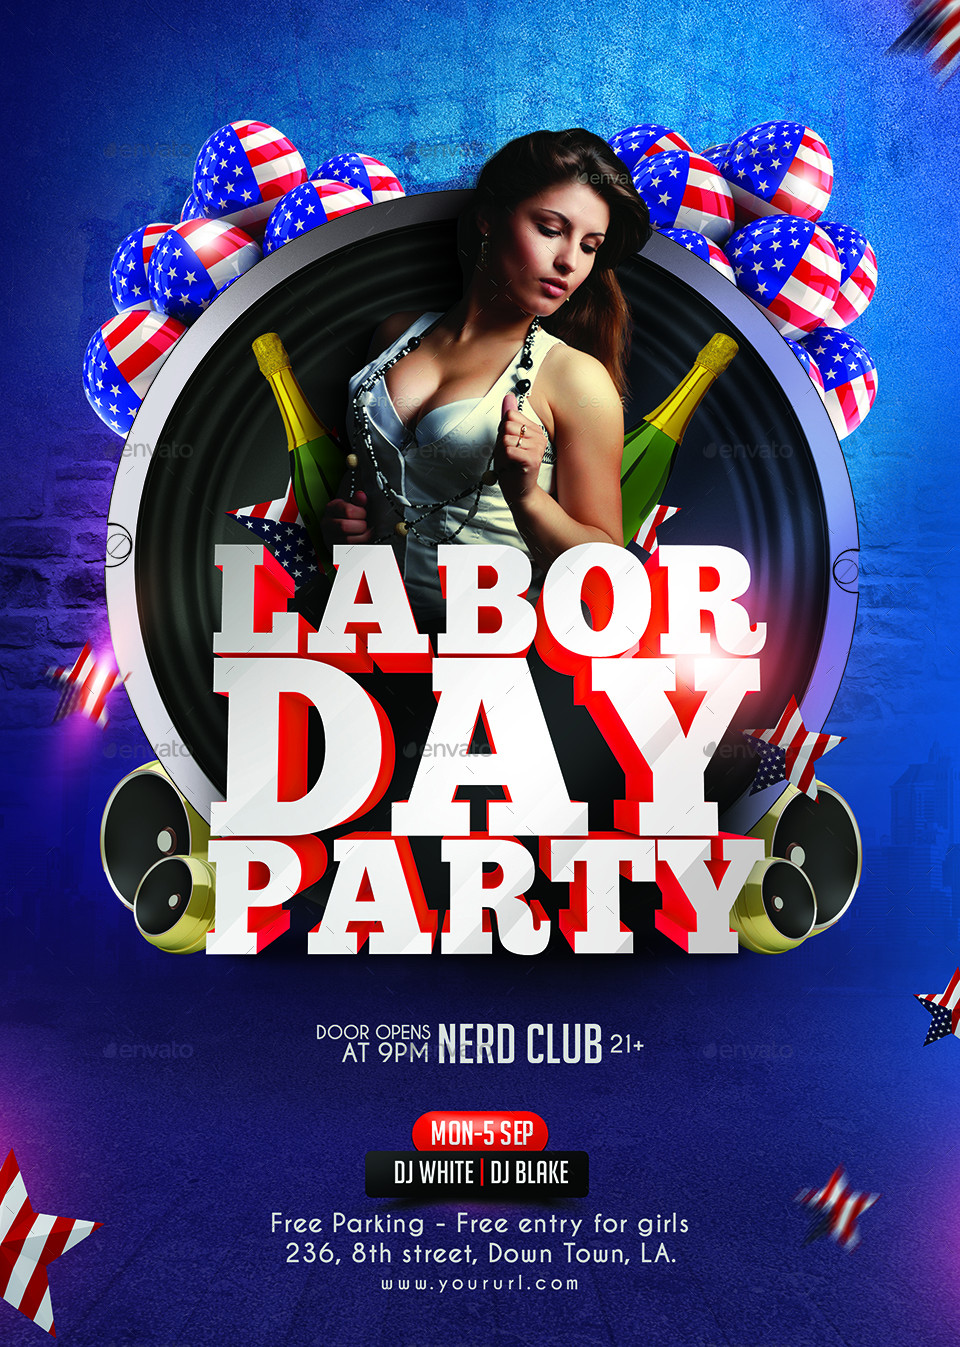 Labor Day Party
 Labor Day Party Flyer Template 2 Sizes by Hyov